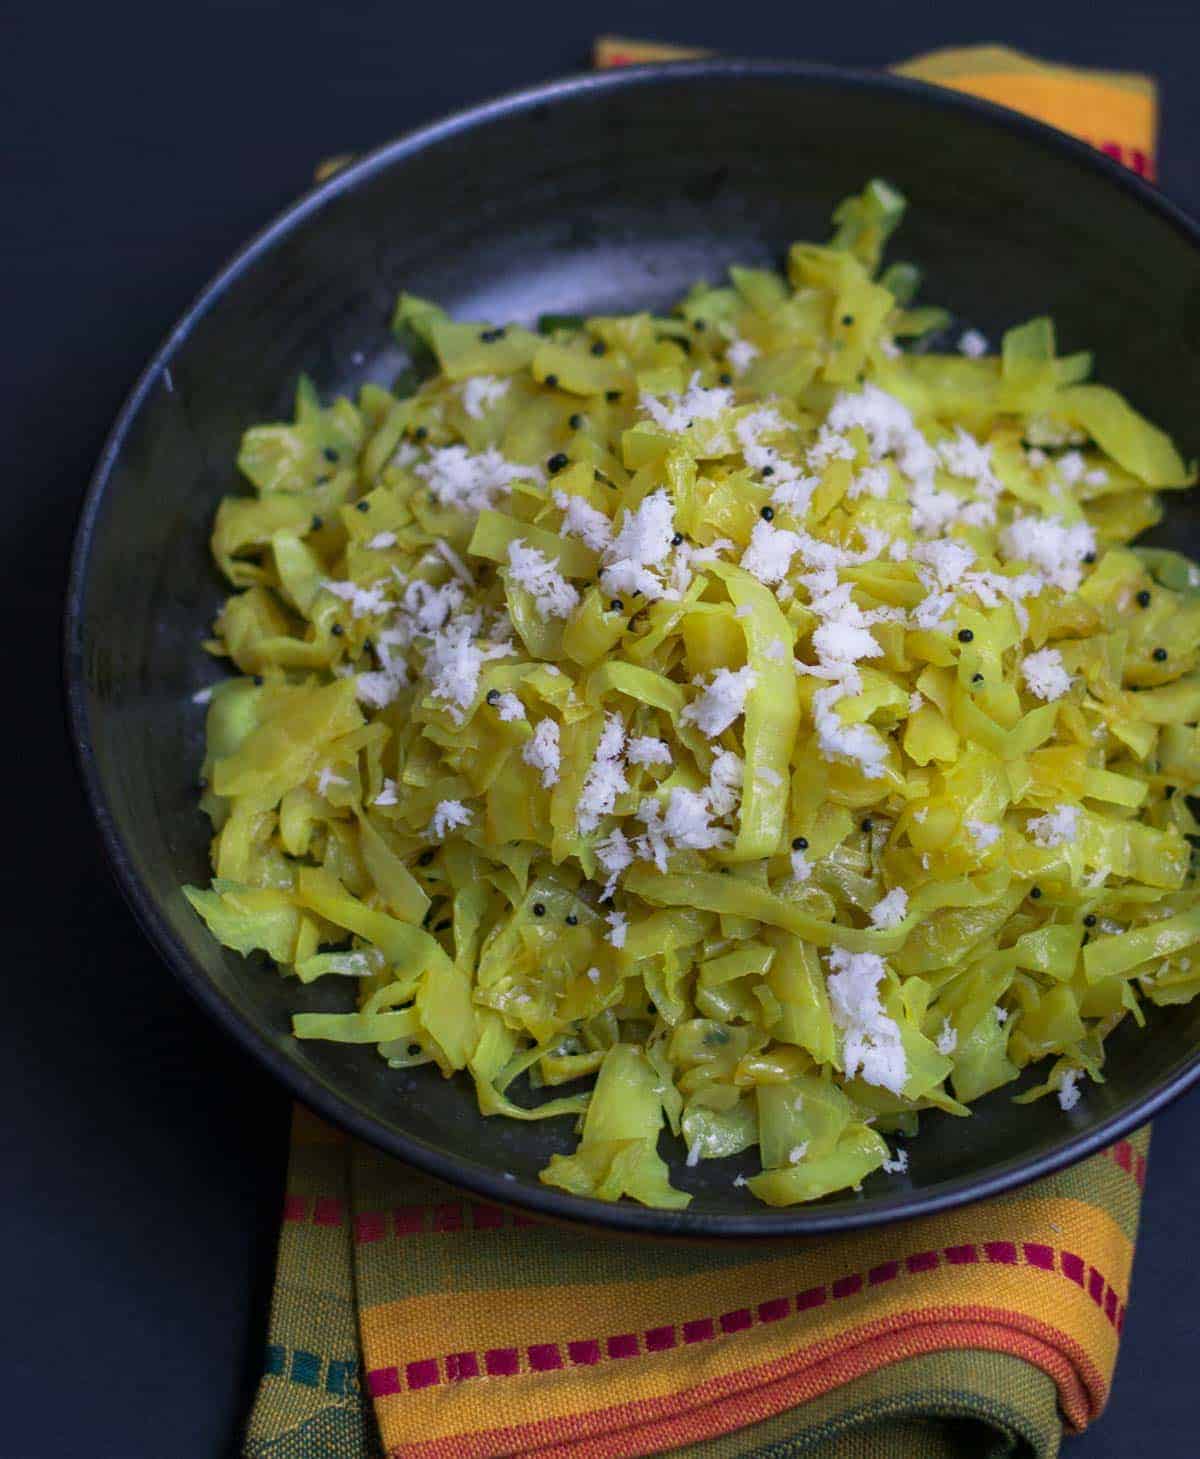 Cabbage palya served in black bowl garnished with coconut